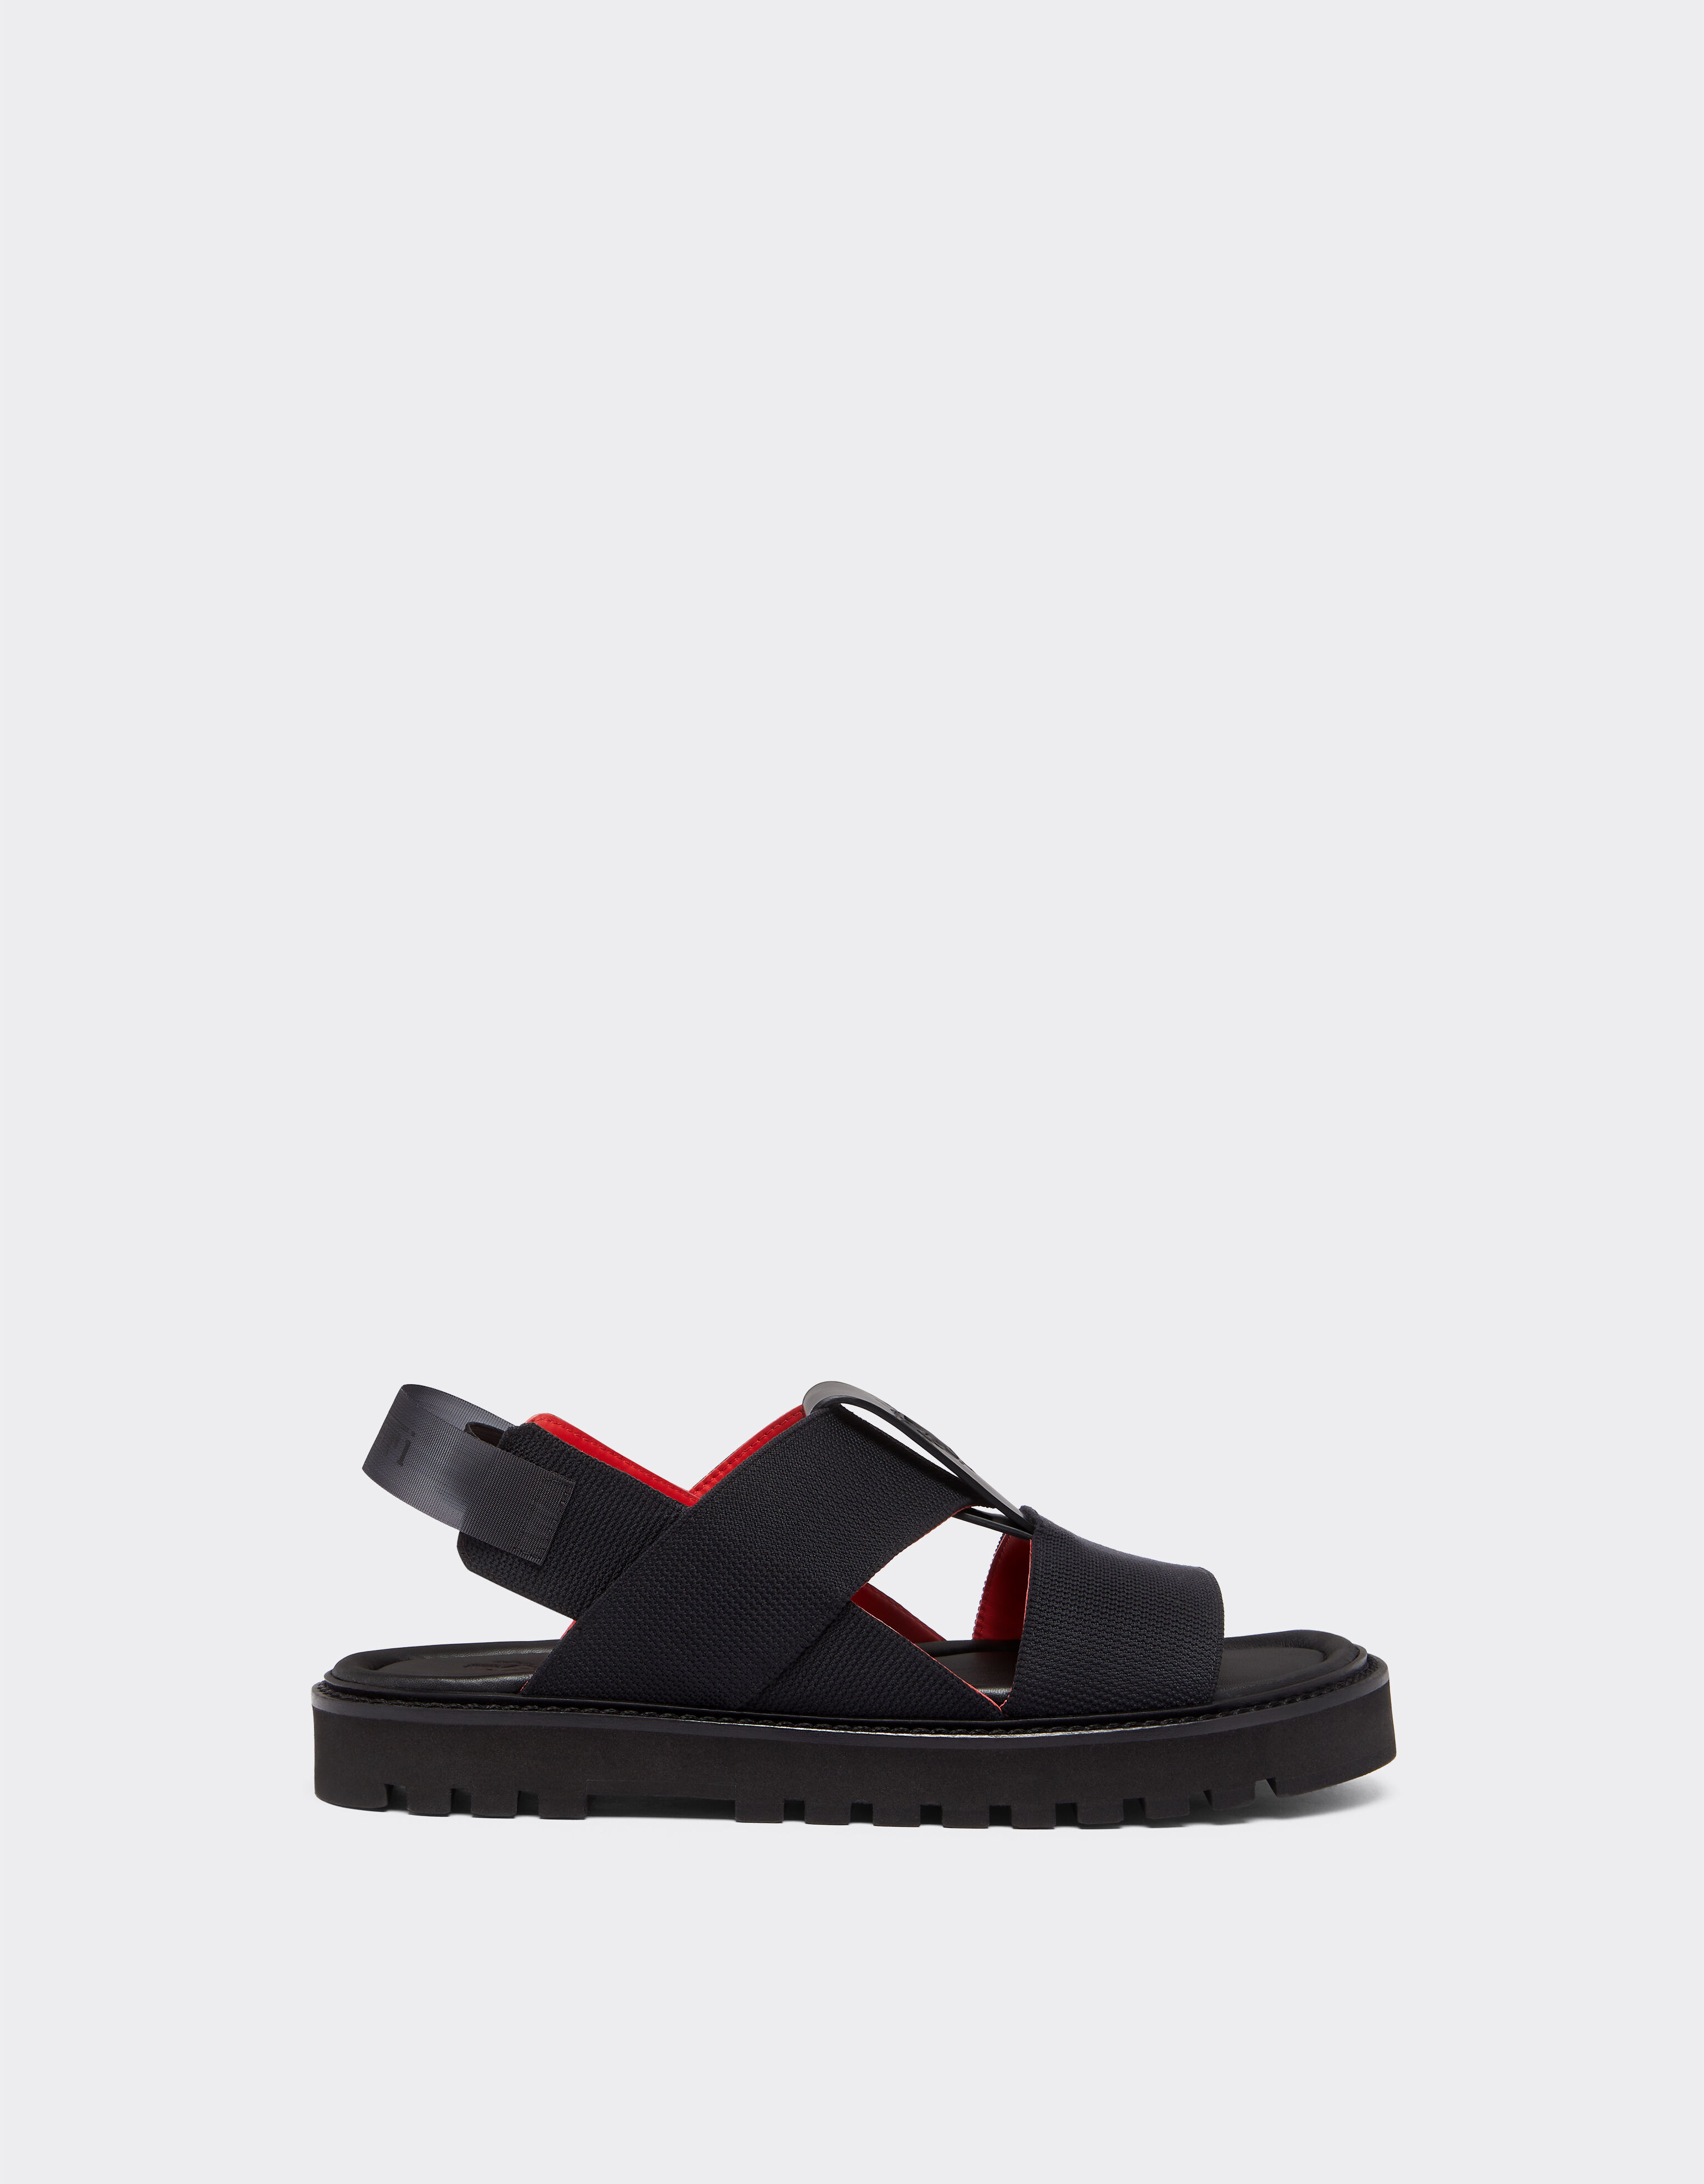 ${brand} Sandals in leather and elasticated mesh ${colorDescription} ${masterID}